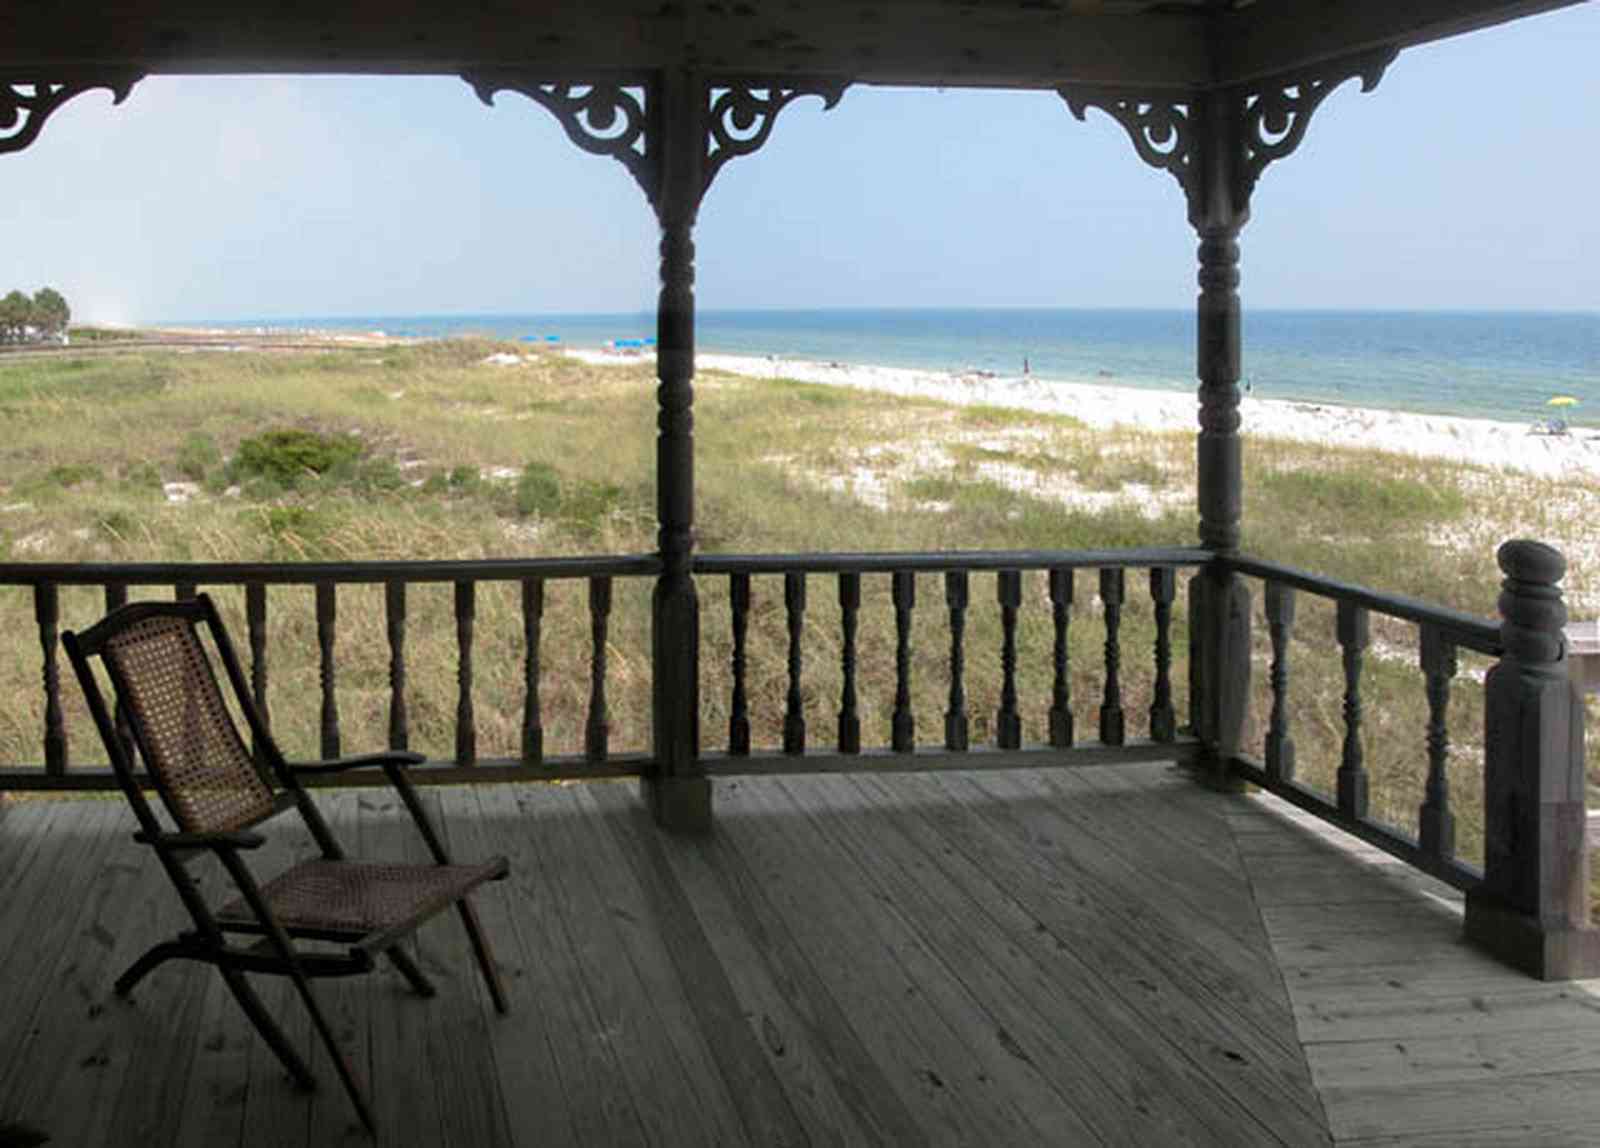 Perdido-Key:-Gothic-House_08g.jpg:  porch, deck, deck chairs, gothic architecture, dunes, white sand, gulf of mexico, perdido key, escambia county, weathered wood, rough wood, newel post